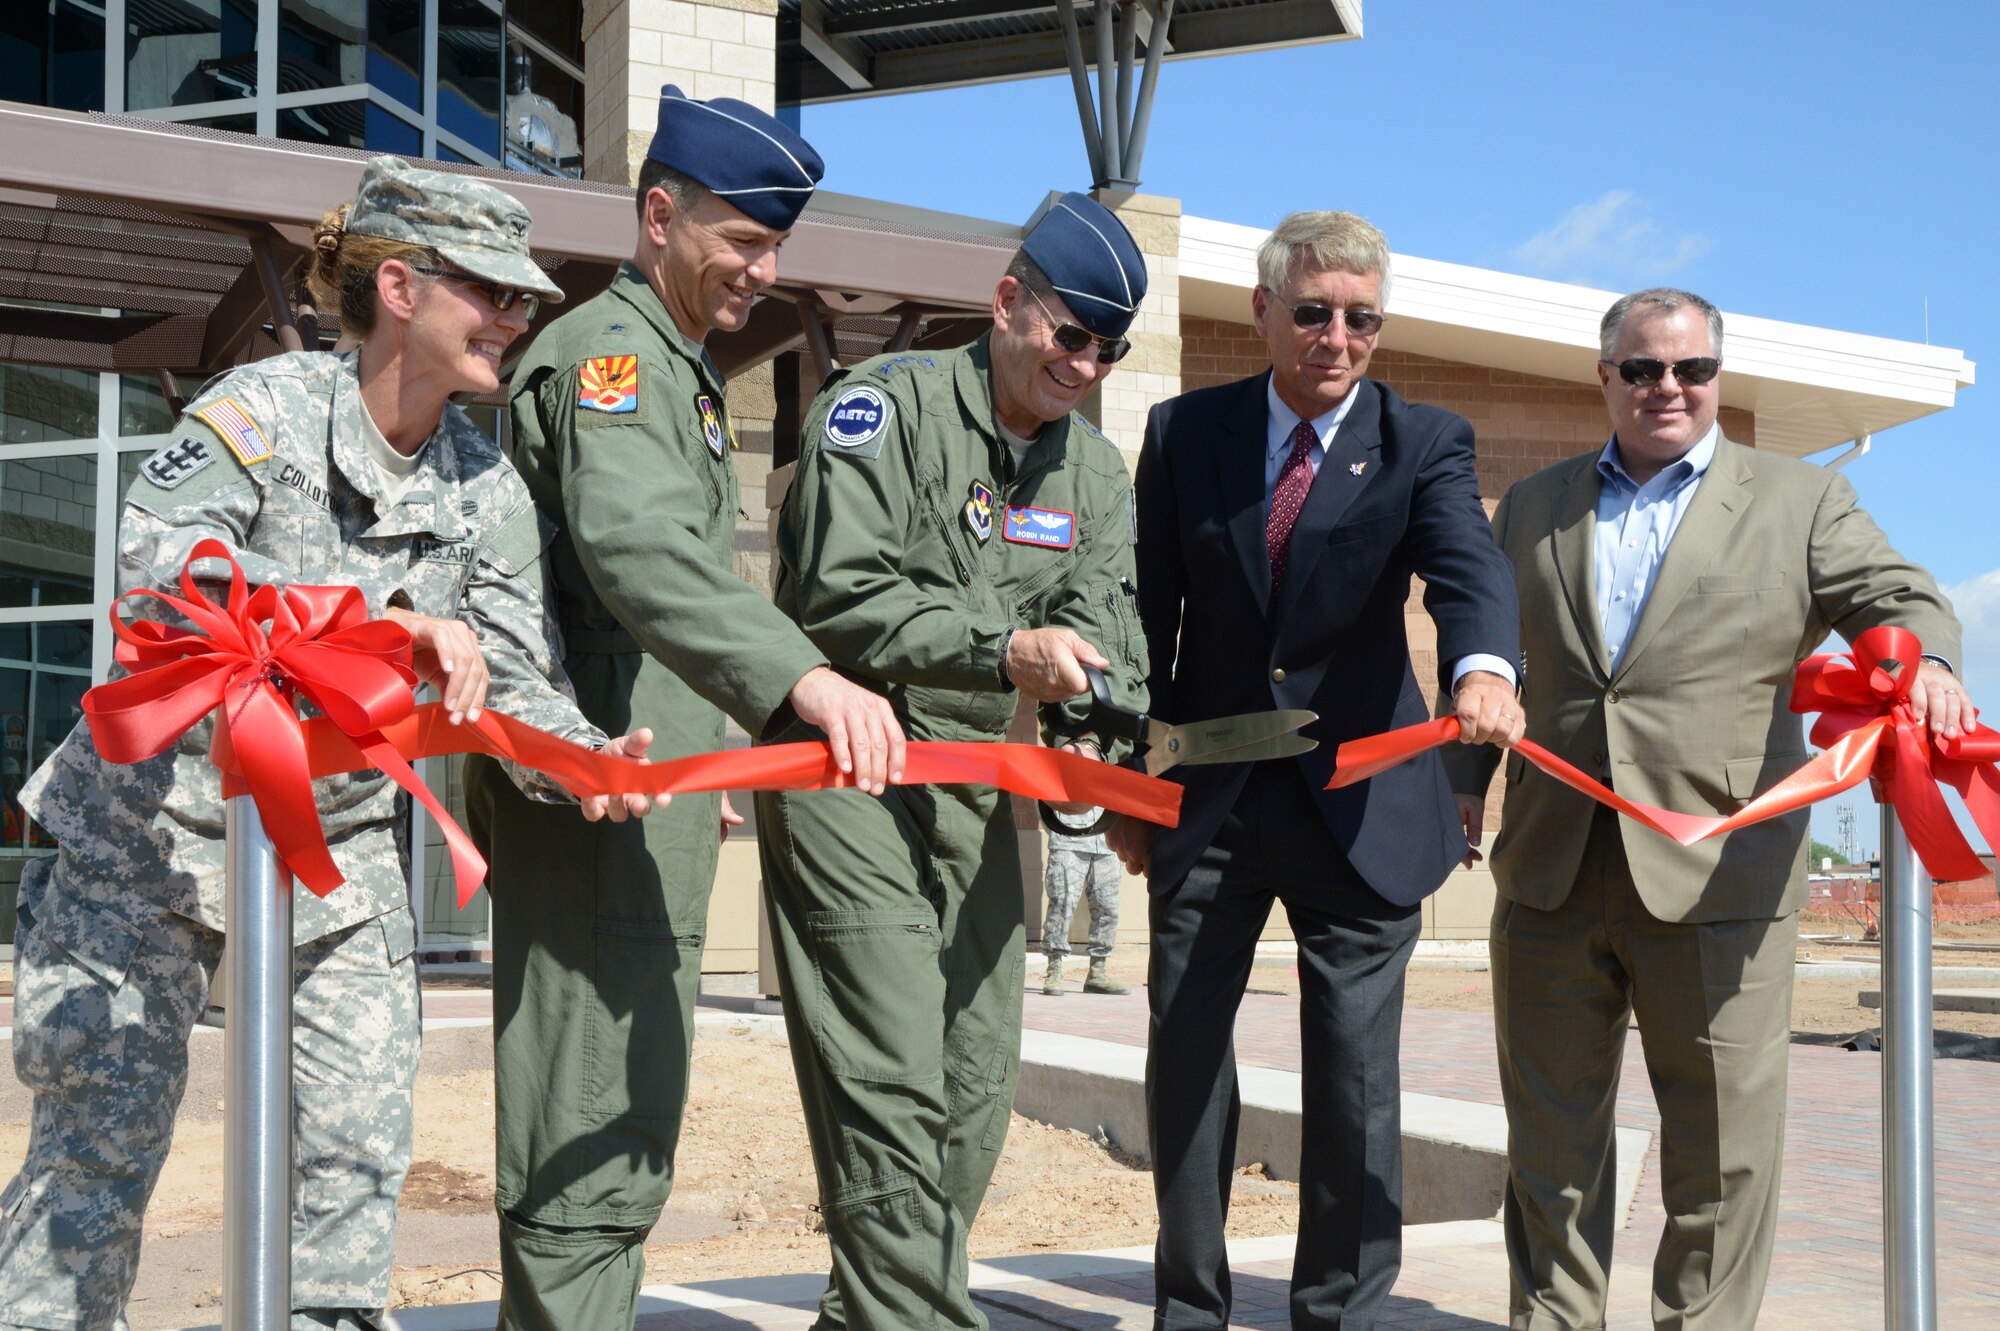 Gen. Robin Rand, Air Education and Training Command commander, cuts the ceremonial ribbon Oct. 9 marking the completion of the academic training center building at Luke Air Force Base. The building is to be used for F-35 Lightning II joint strike fighter pilot training. The ribbon cutting included representatives from the Army Corps of Engineers, 56th Fighter Wing, AETC, Lockheed Martin and the Walsh Group. The facility began receiving furniture, phones and computers Monday. (U.S. Air Force photo/Airman 1st Class James Hensley)